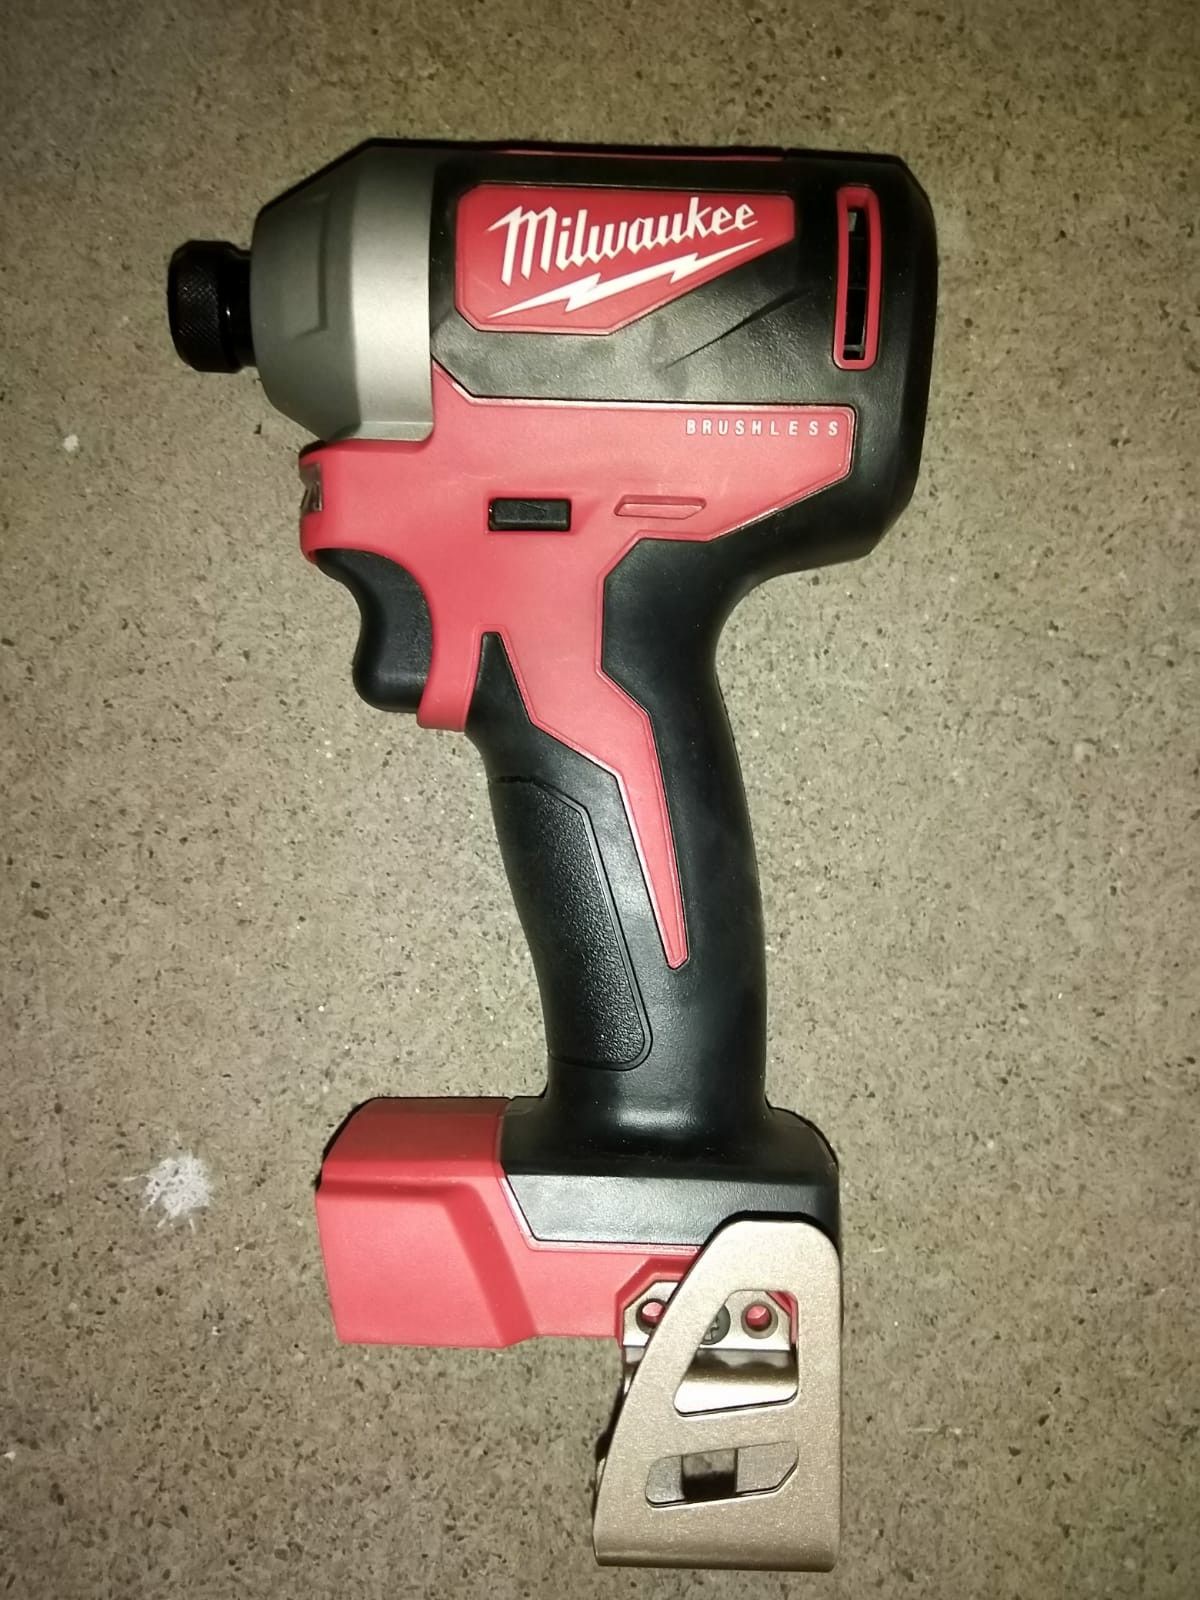 IMPACT DRILL MILWAUKEE BRUSHLESS BATTERY NOT INCLUDED